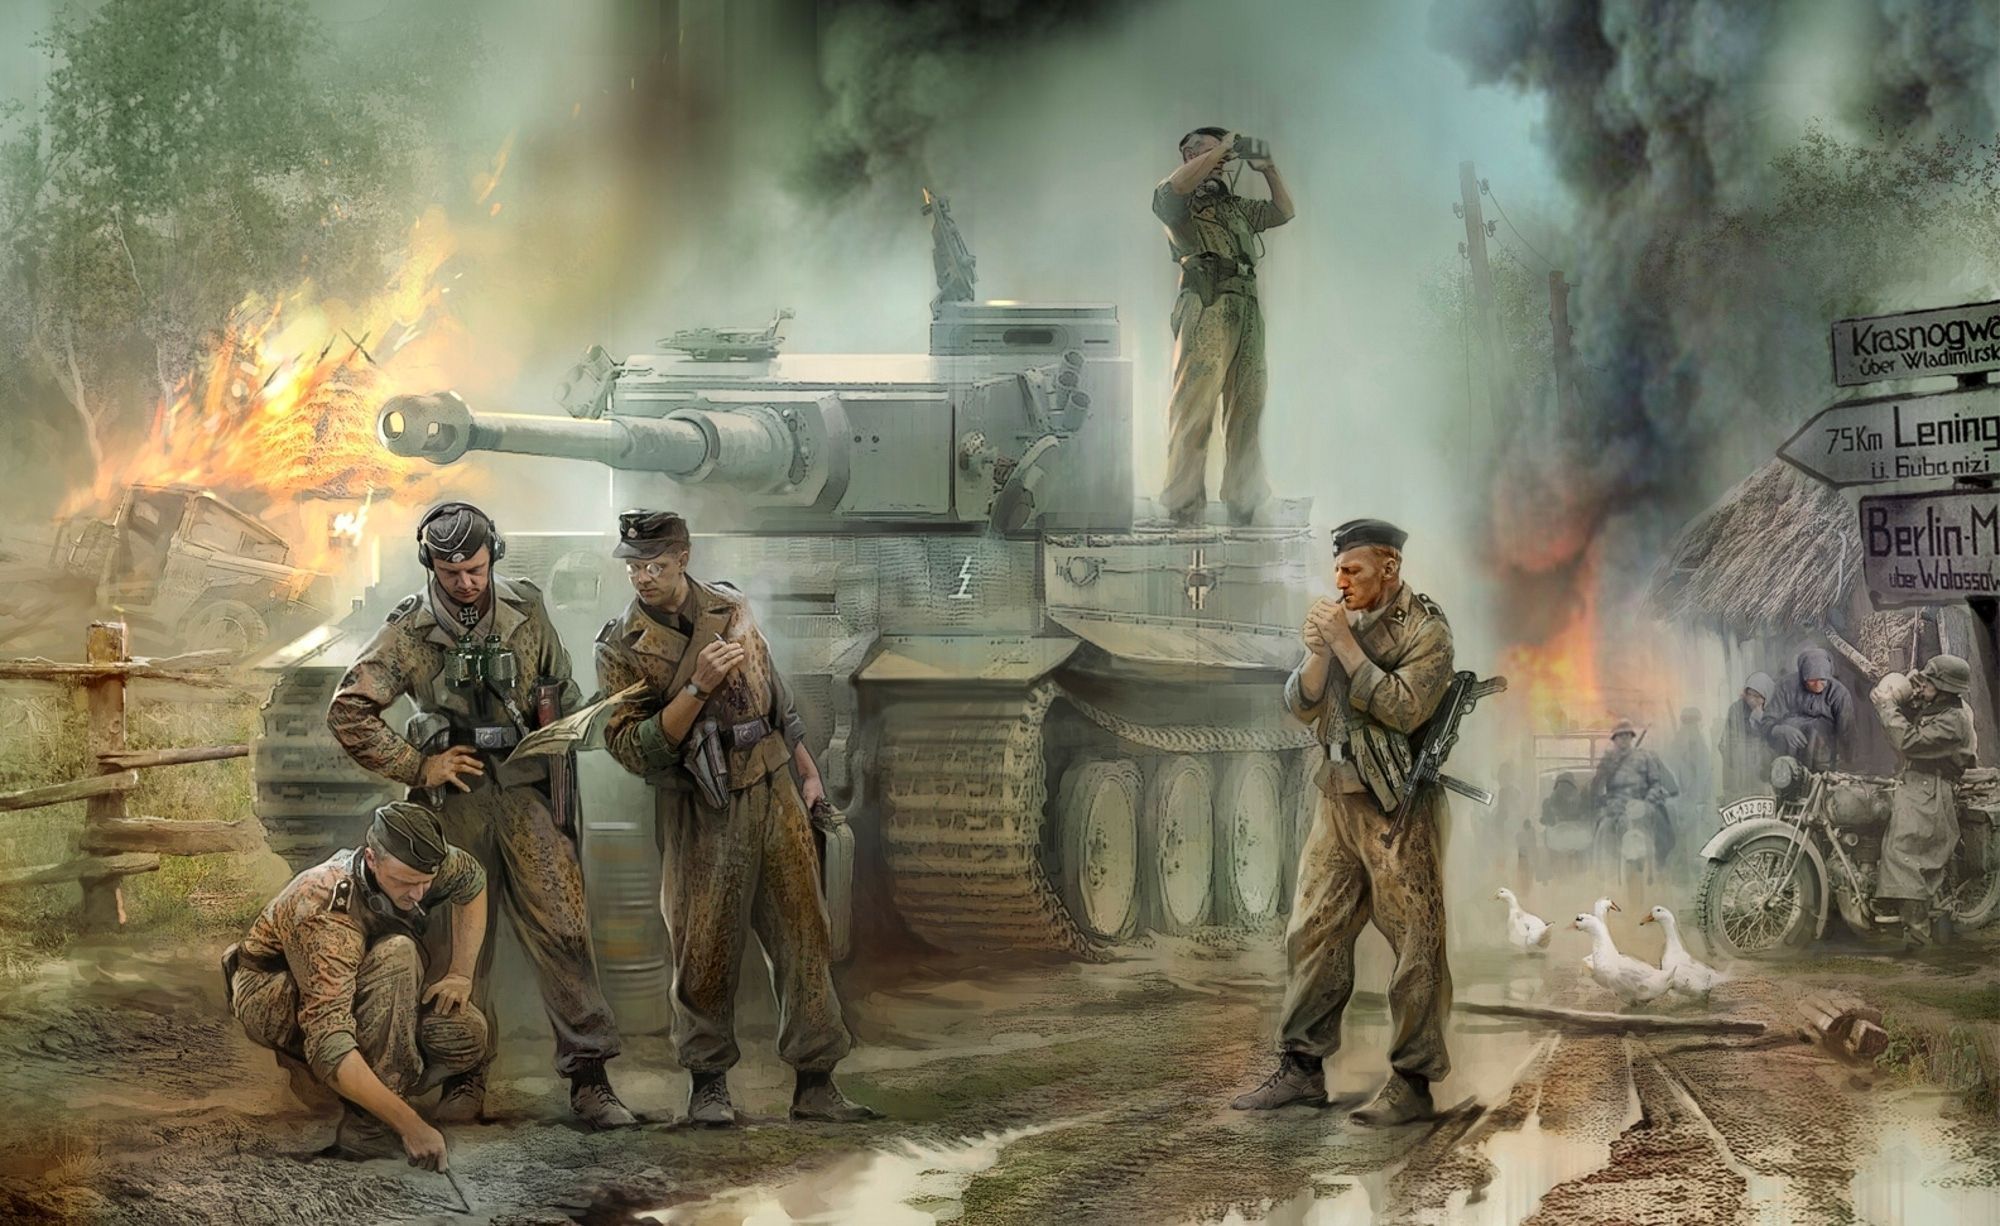 Wallpapers Tanks Soldiers Tiger Army Image #324158 Download